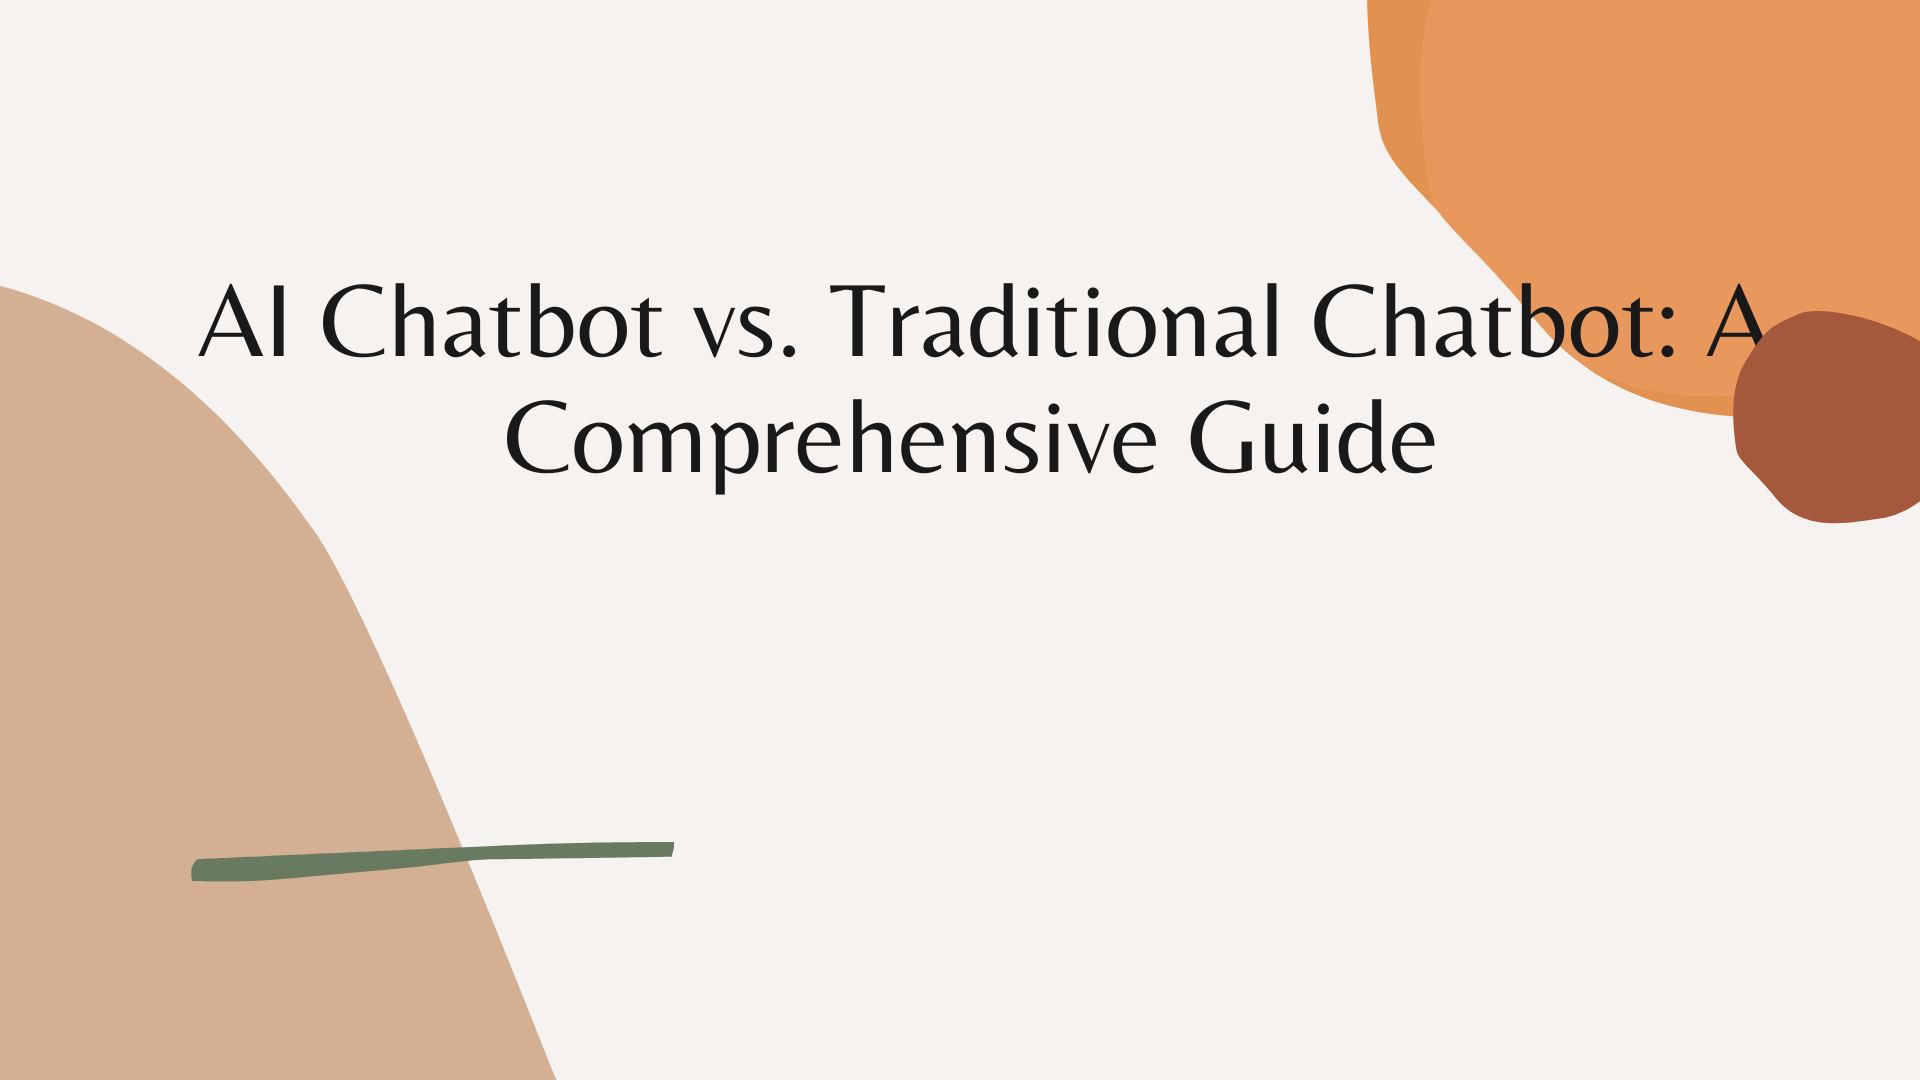 AI Chatbot vs. Traditional Chatbot: A Comprehensive Guide